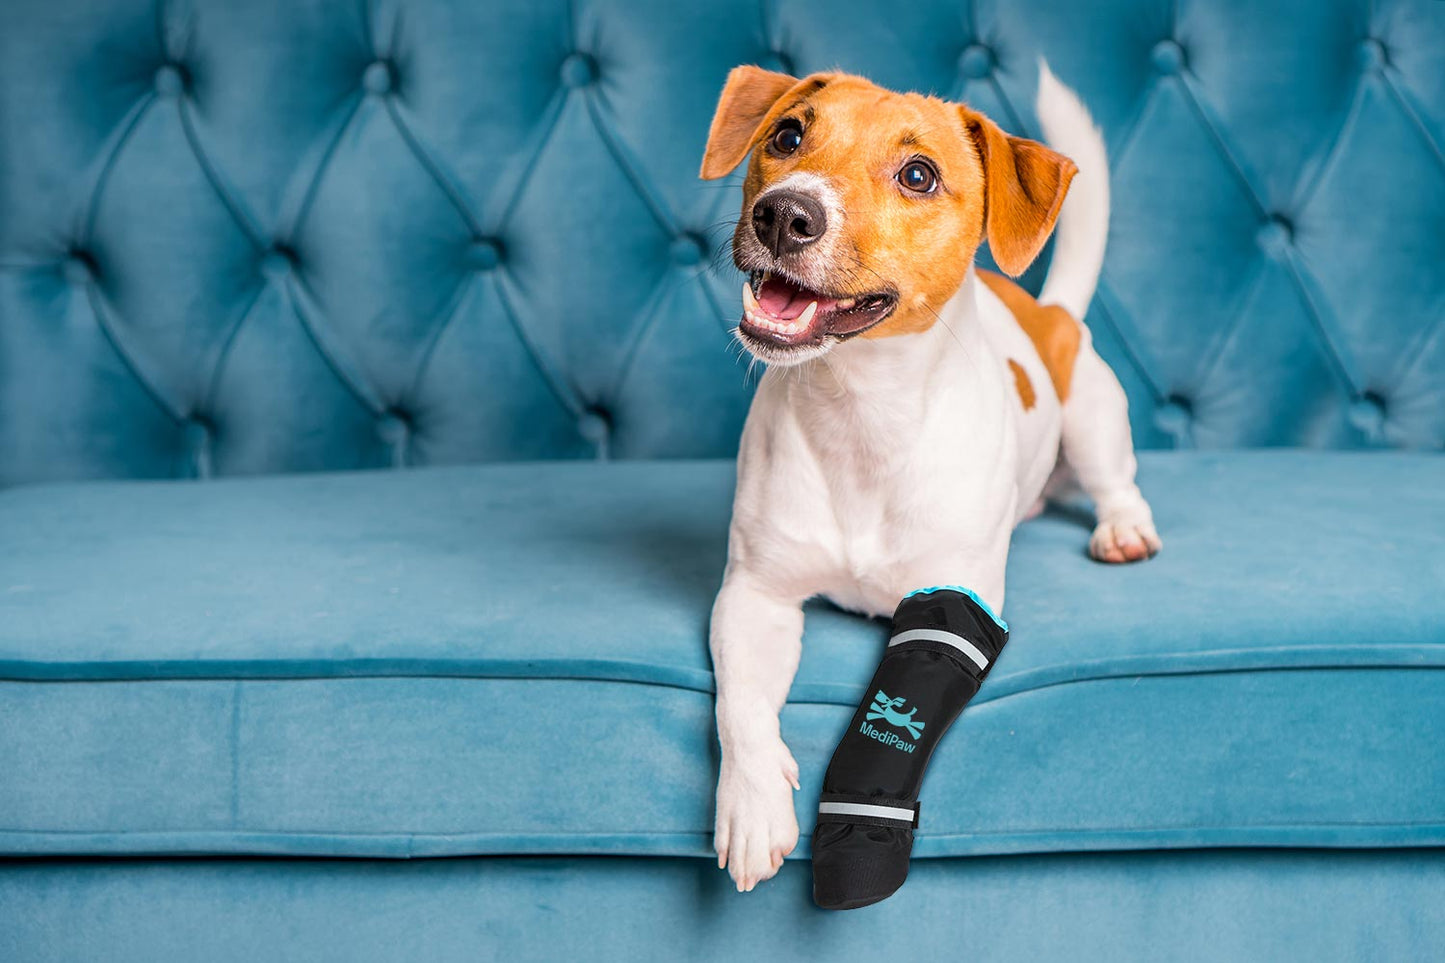 A dog sitting on a blue couch with an ankle brace wearing Your Whole Dog's MediPaw: Healing Slim Boot items.